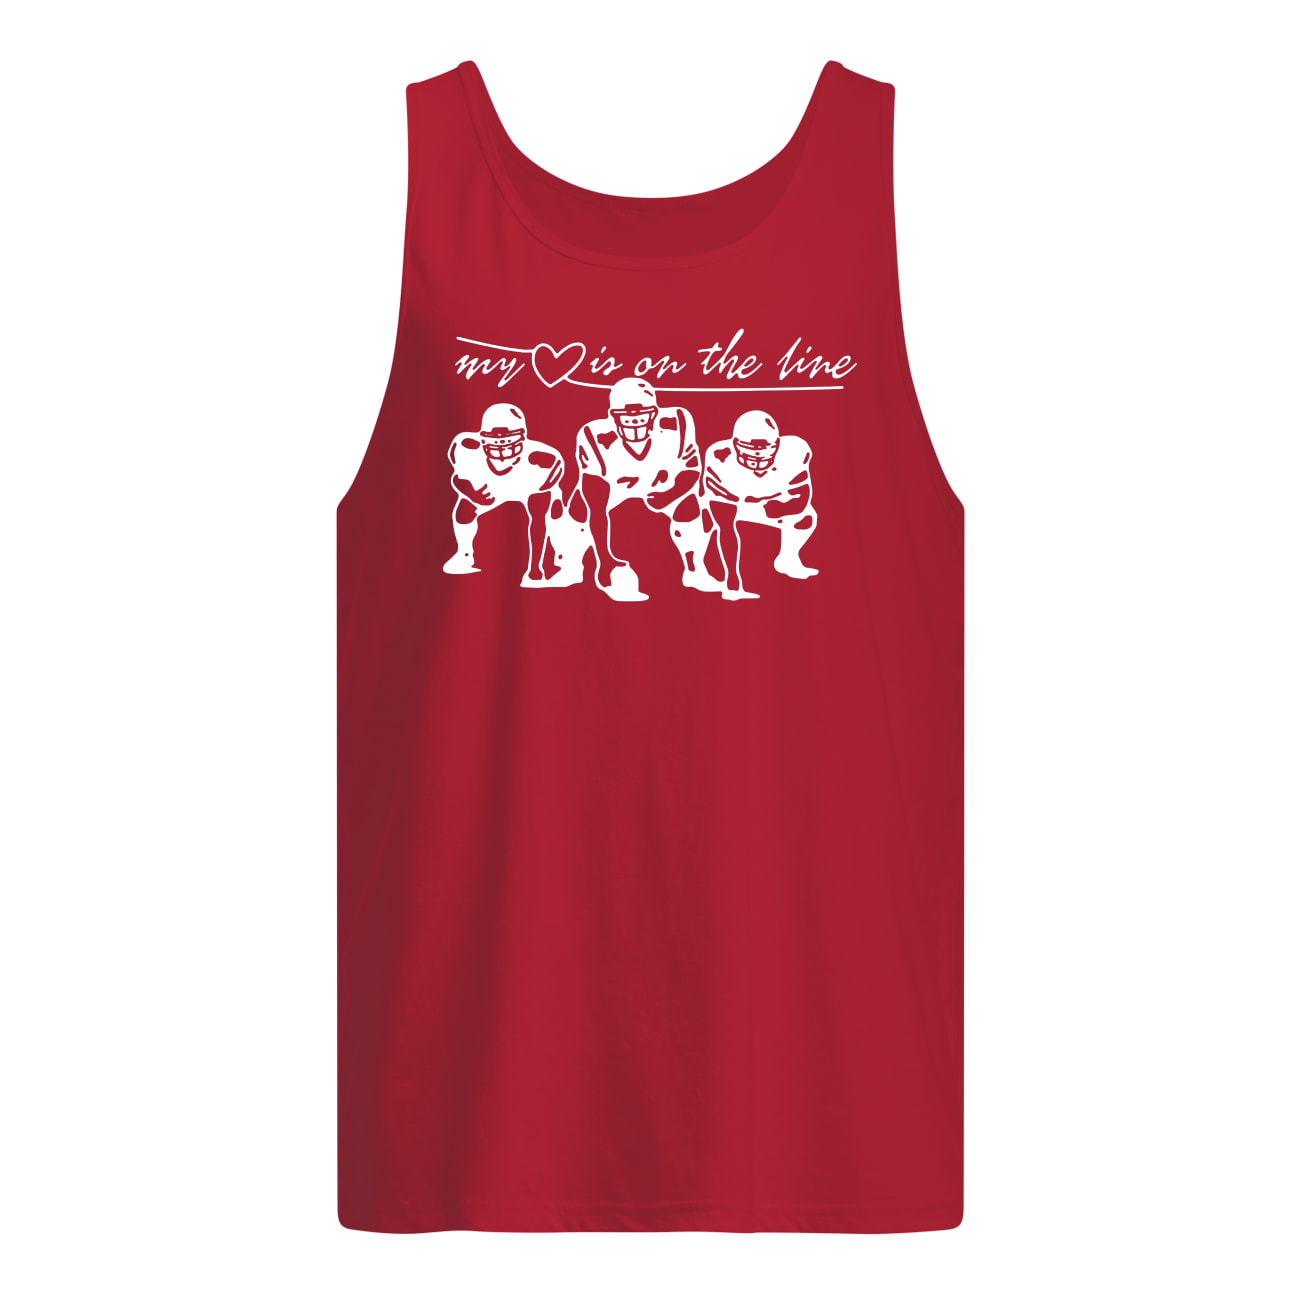 NFL My heart is on the line tank top